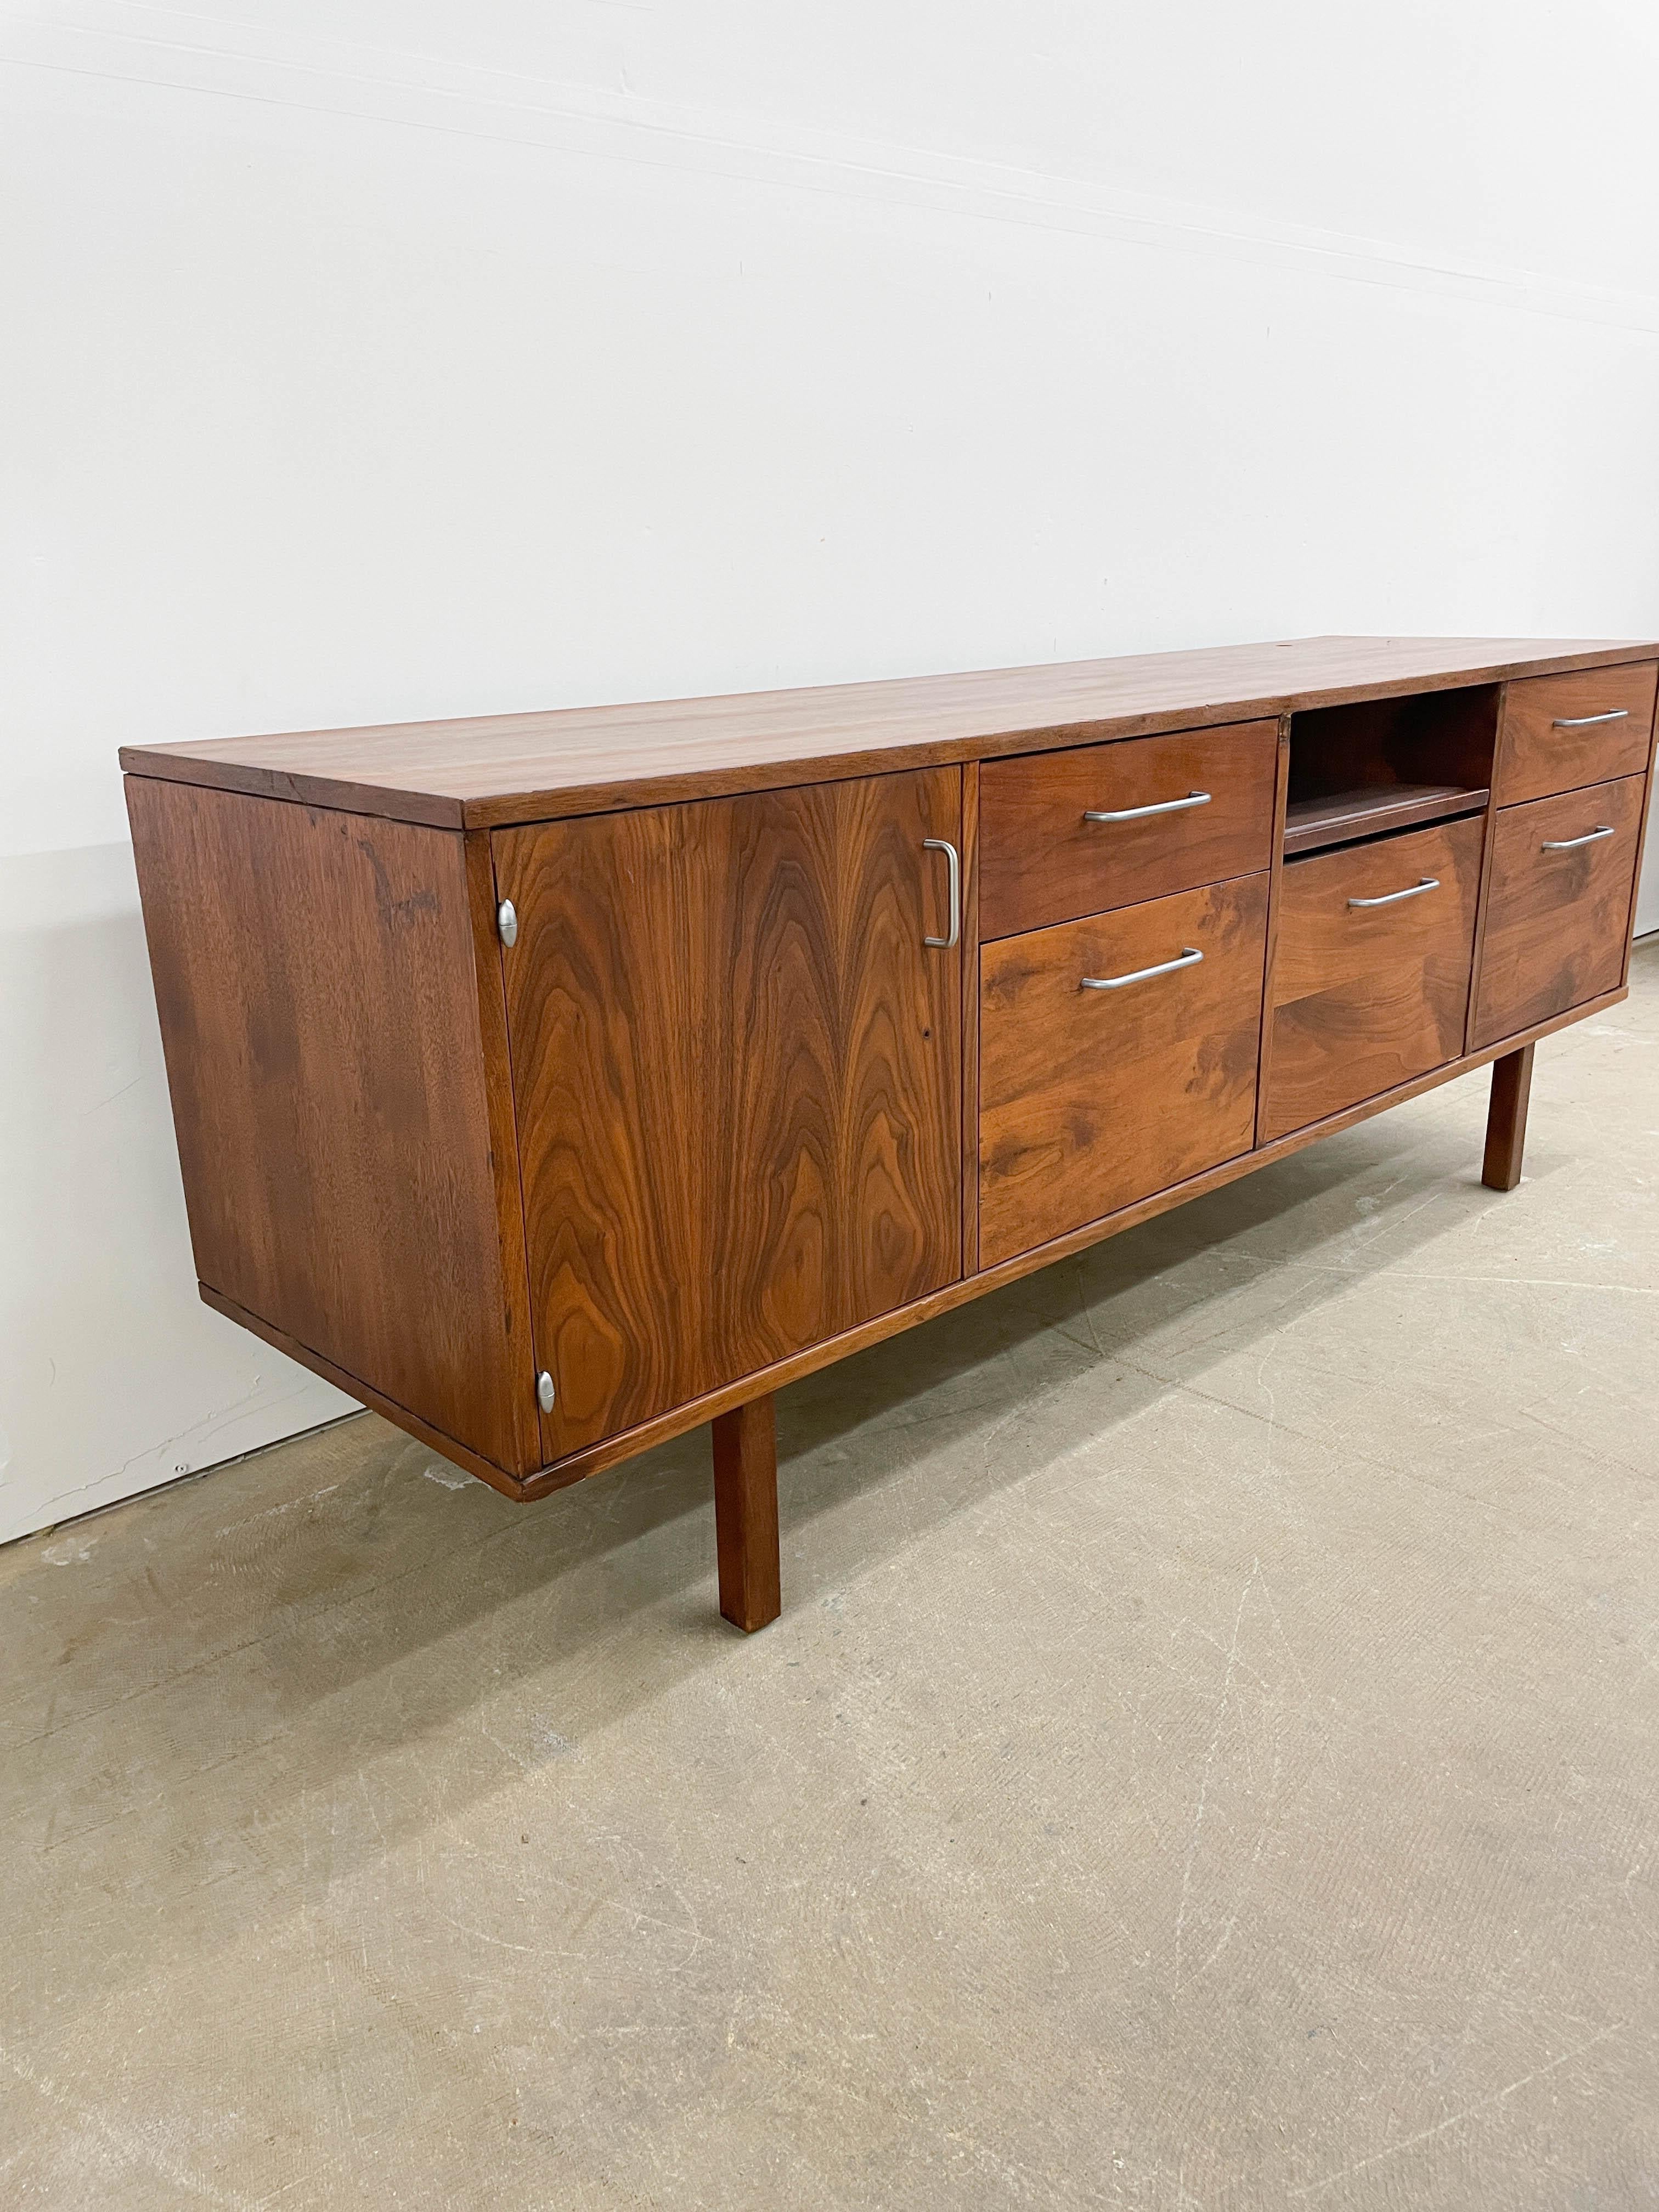 Functional and understated walnut credenza designed by Jens Risom for his own company, Jens Risom Design in the 1950s. This pieces features five drawers, two of which are hanging file drawers, a slide out typewriter tray and a larger storage